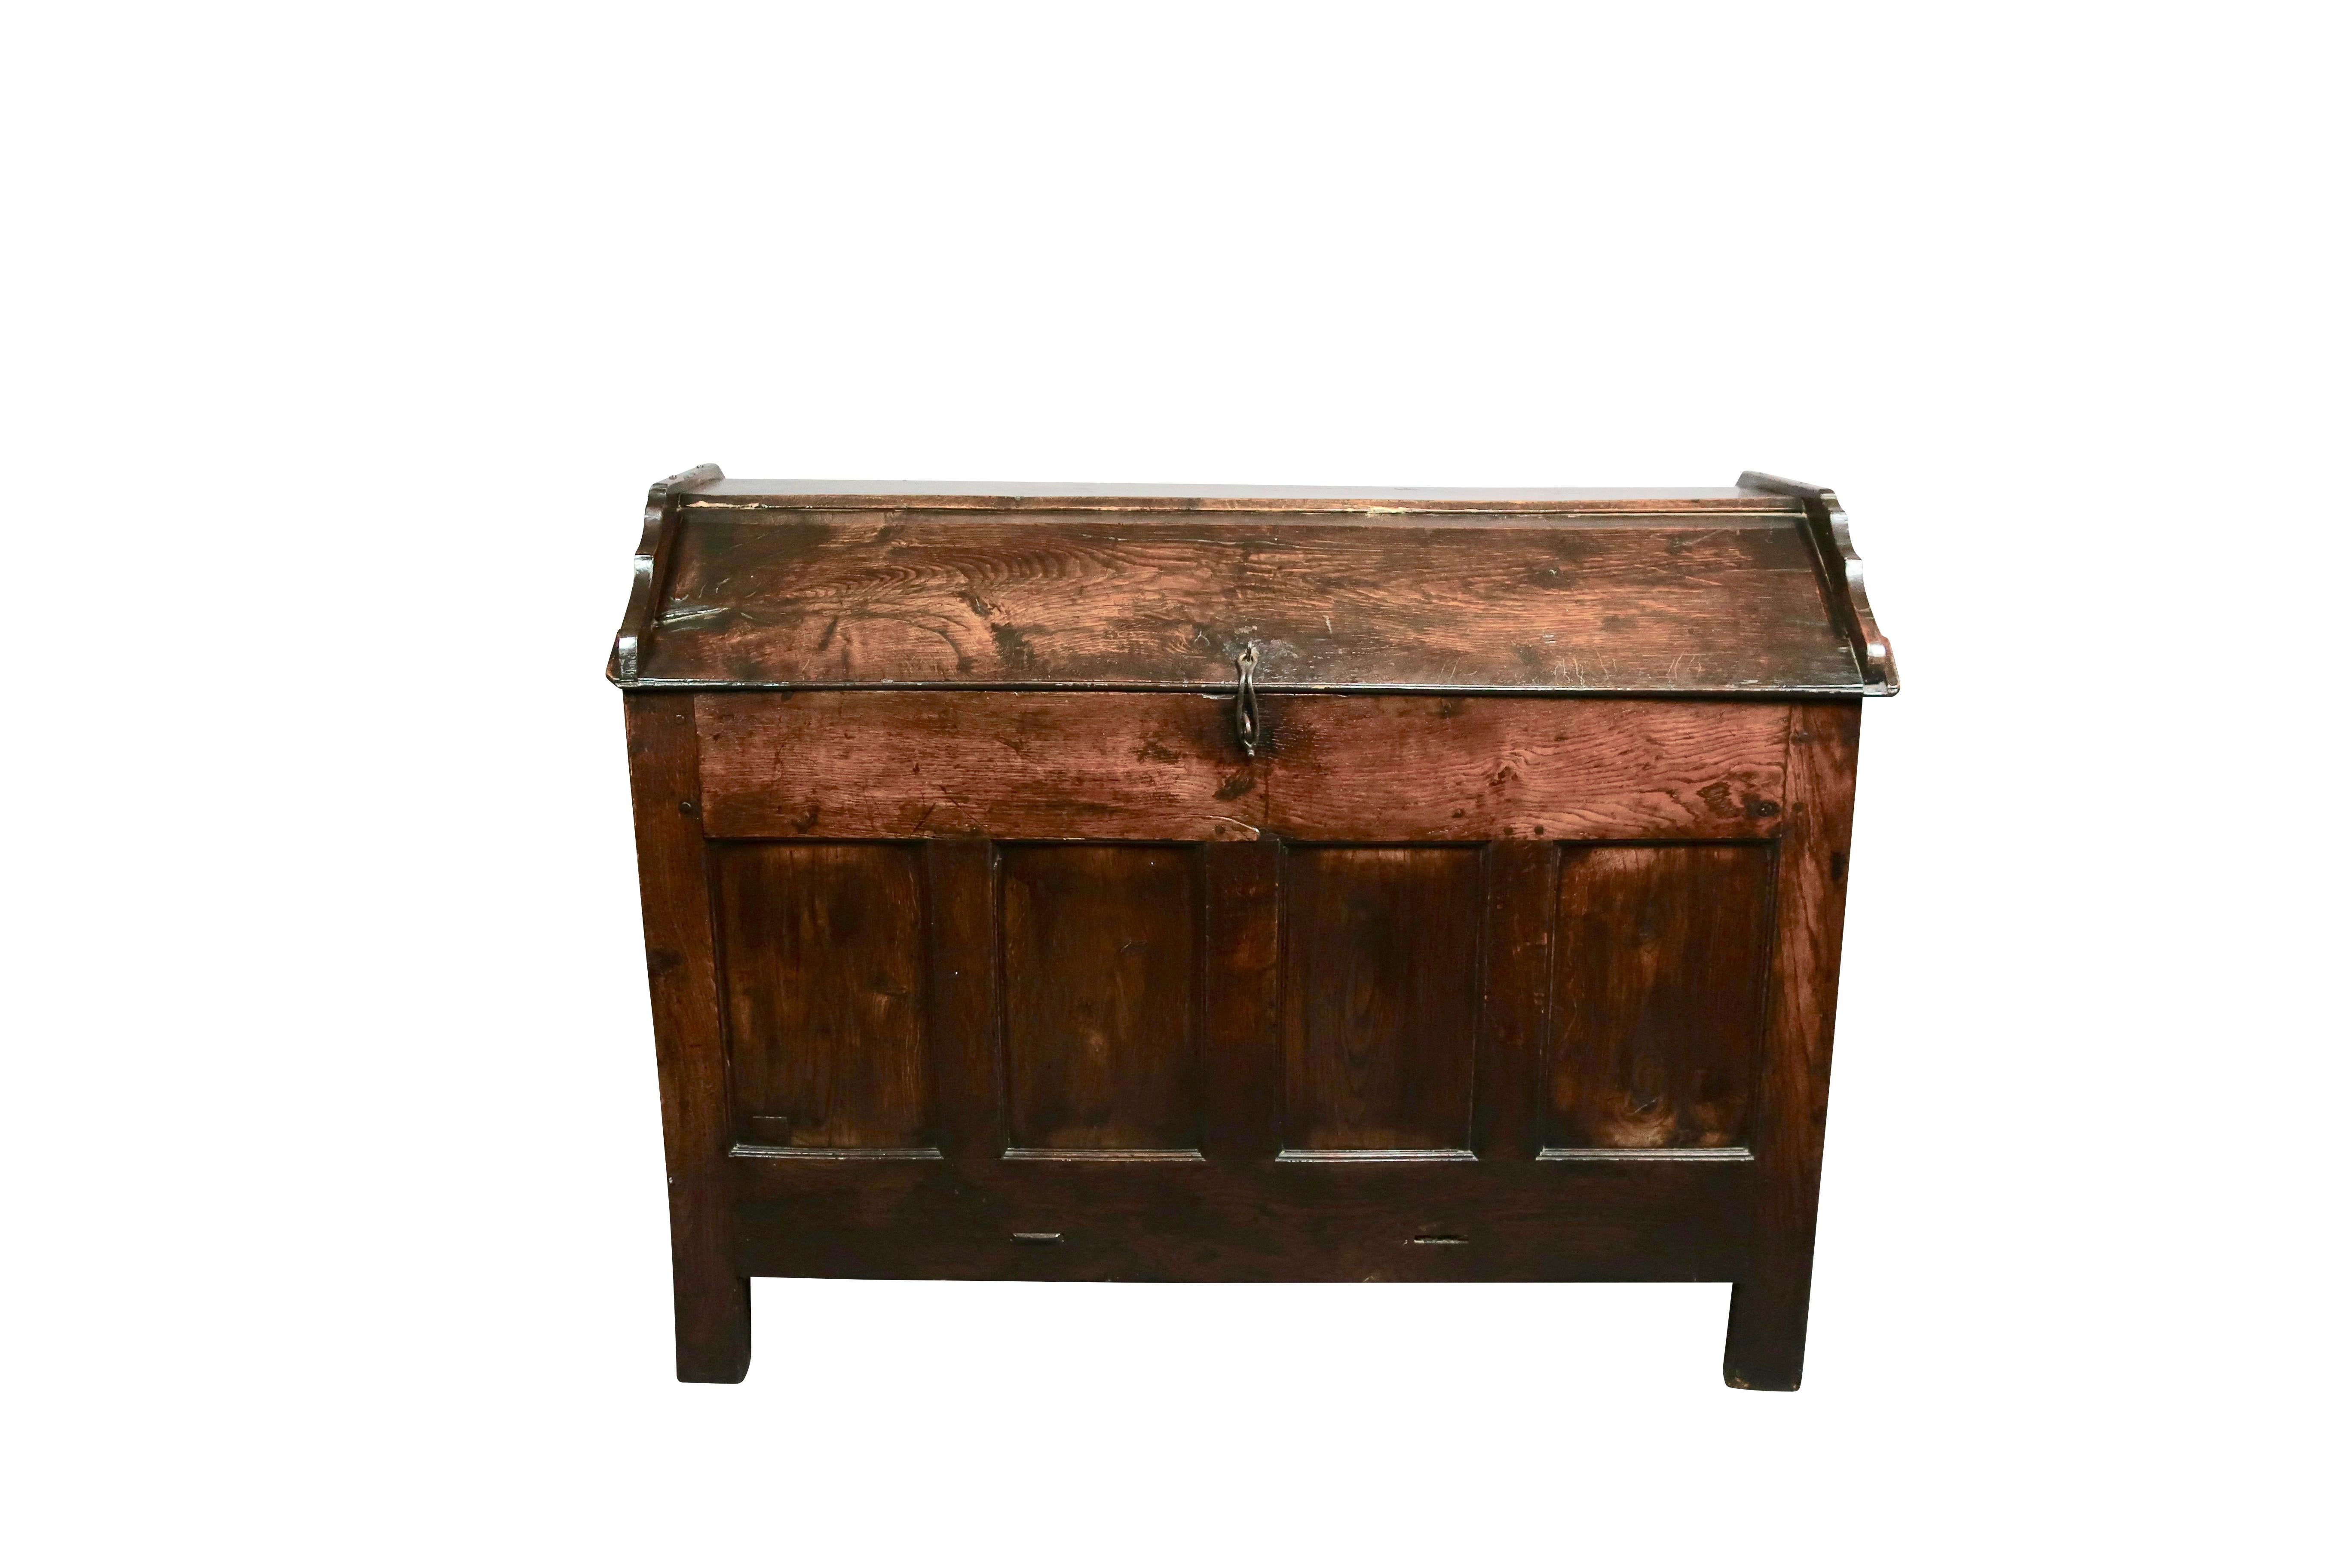 A French hinged lid grain bin, 19th century, in the provincial style, the carved hinged lid over a paneled front carved with four panels between rustic boarded end supports. Original latch closure. Perfect blanket storage solution measuring 30.75